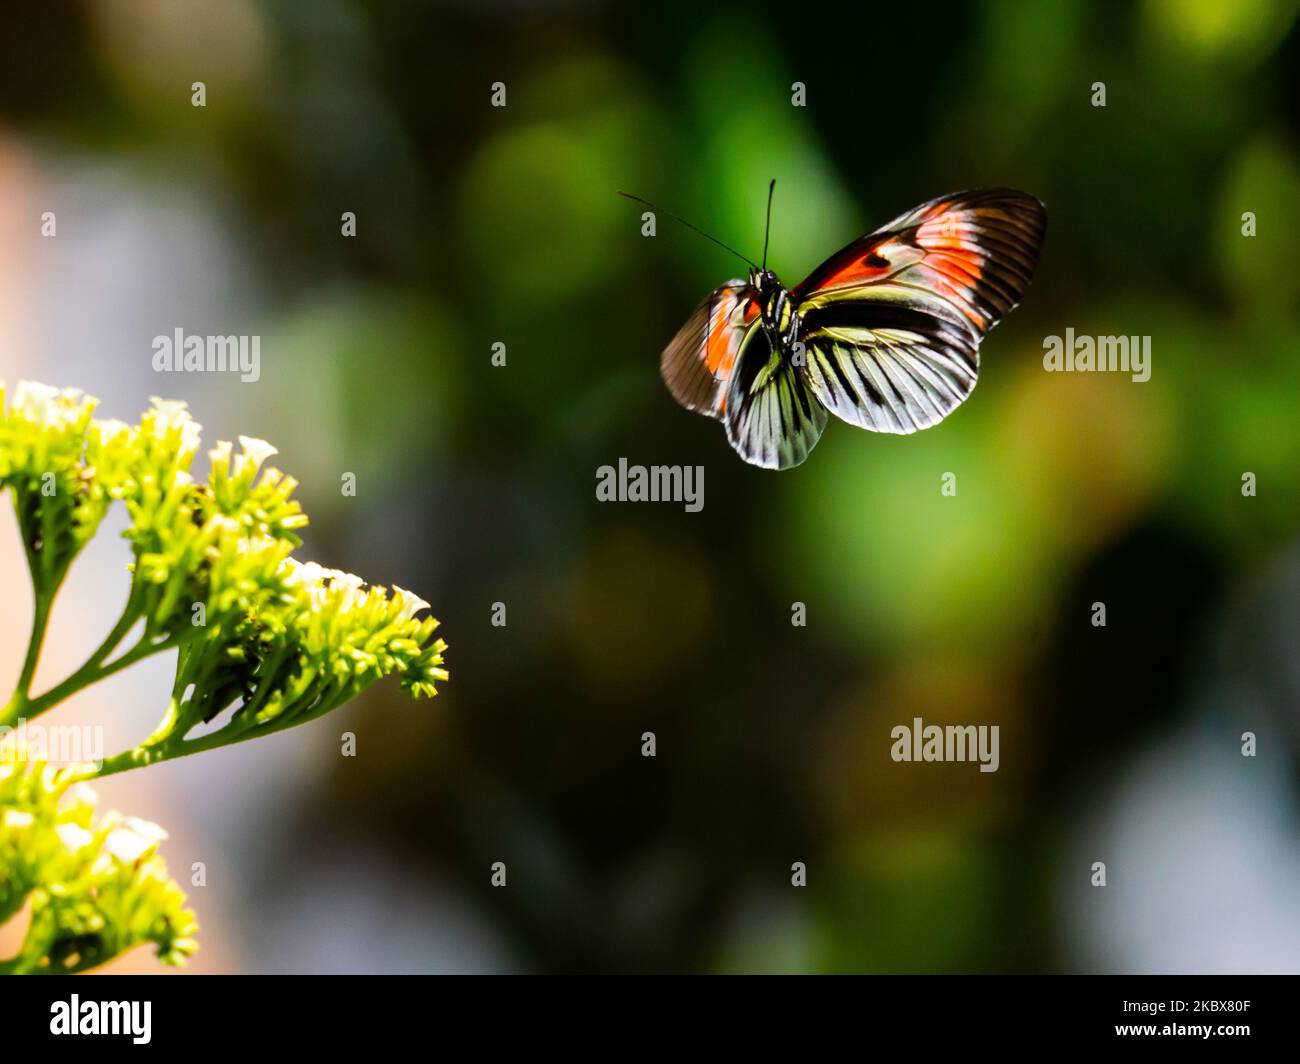 A Postman butterfly (Heliconius melpomene) flying towards a flower on blurred natural background Stock Photo